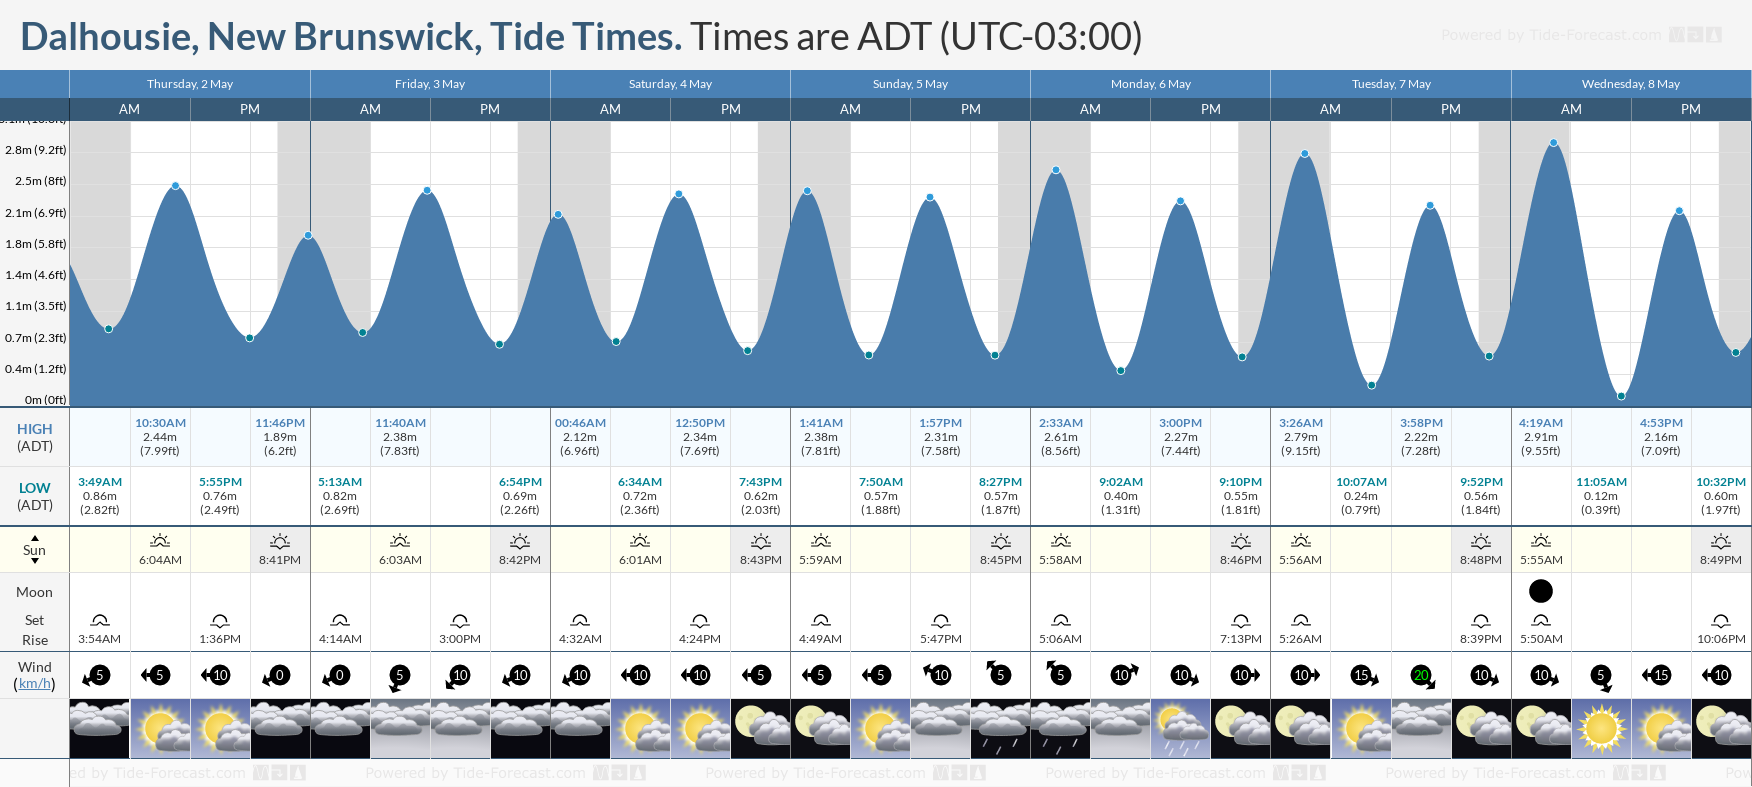 Dalhousie, New Brunswick Tide Chart including high and low tide tide times for the next 7 days